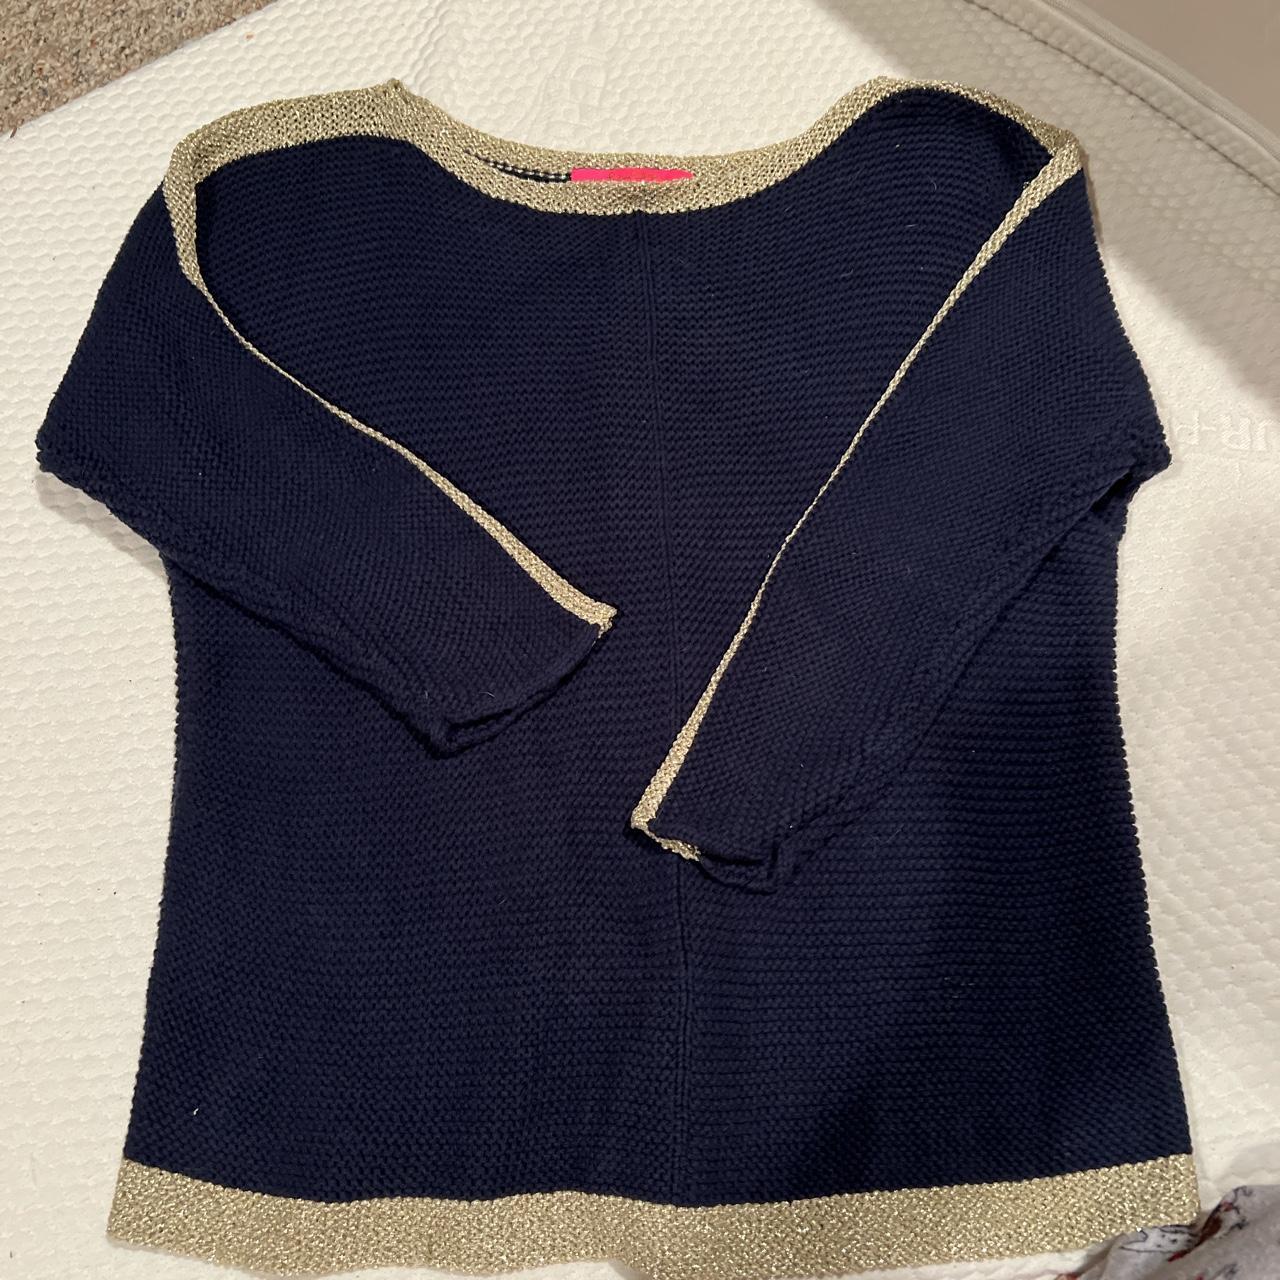 Lilly Pulitzer Women's Navy and Gold Jumper